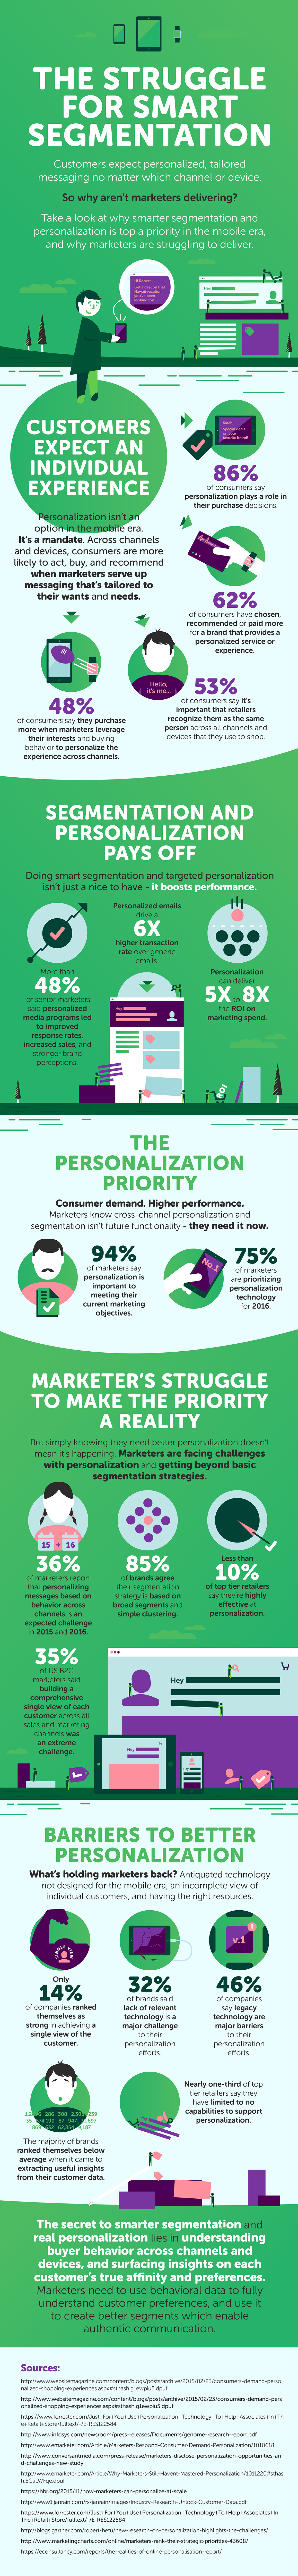 This infographic shows why marketers need to pay more attention to market segmentation.